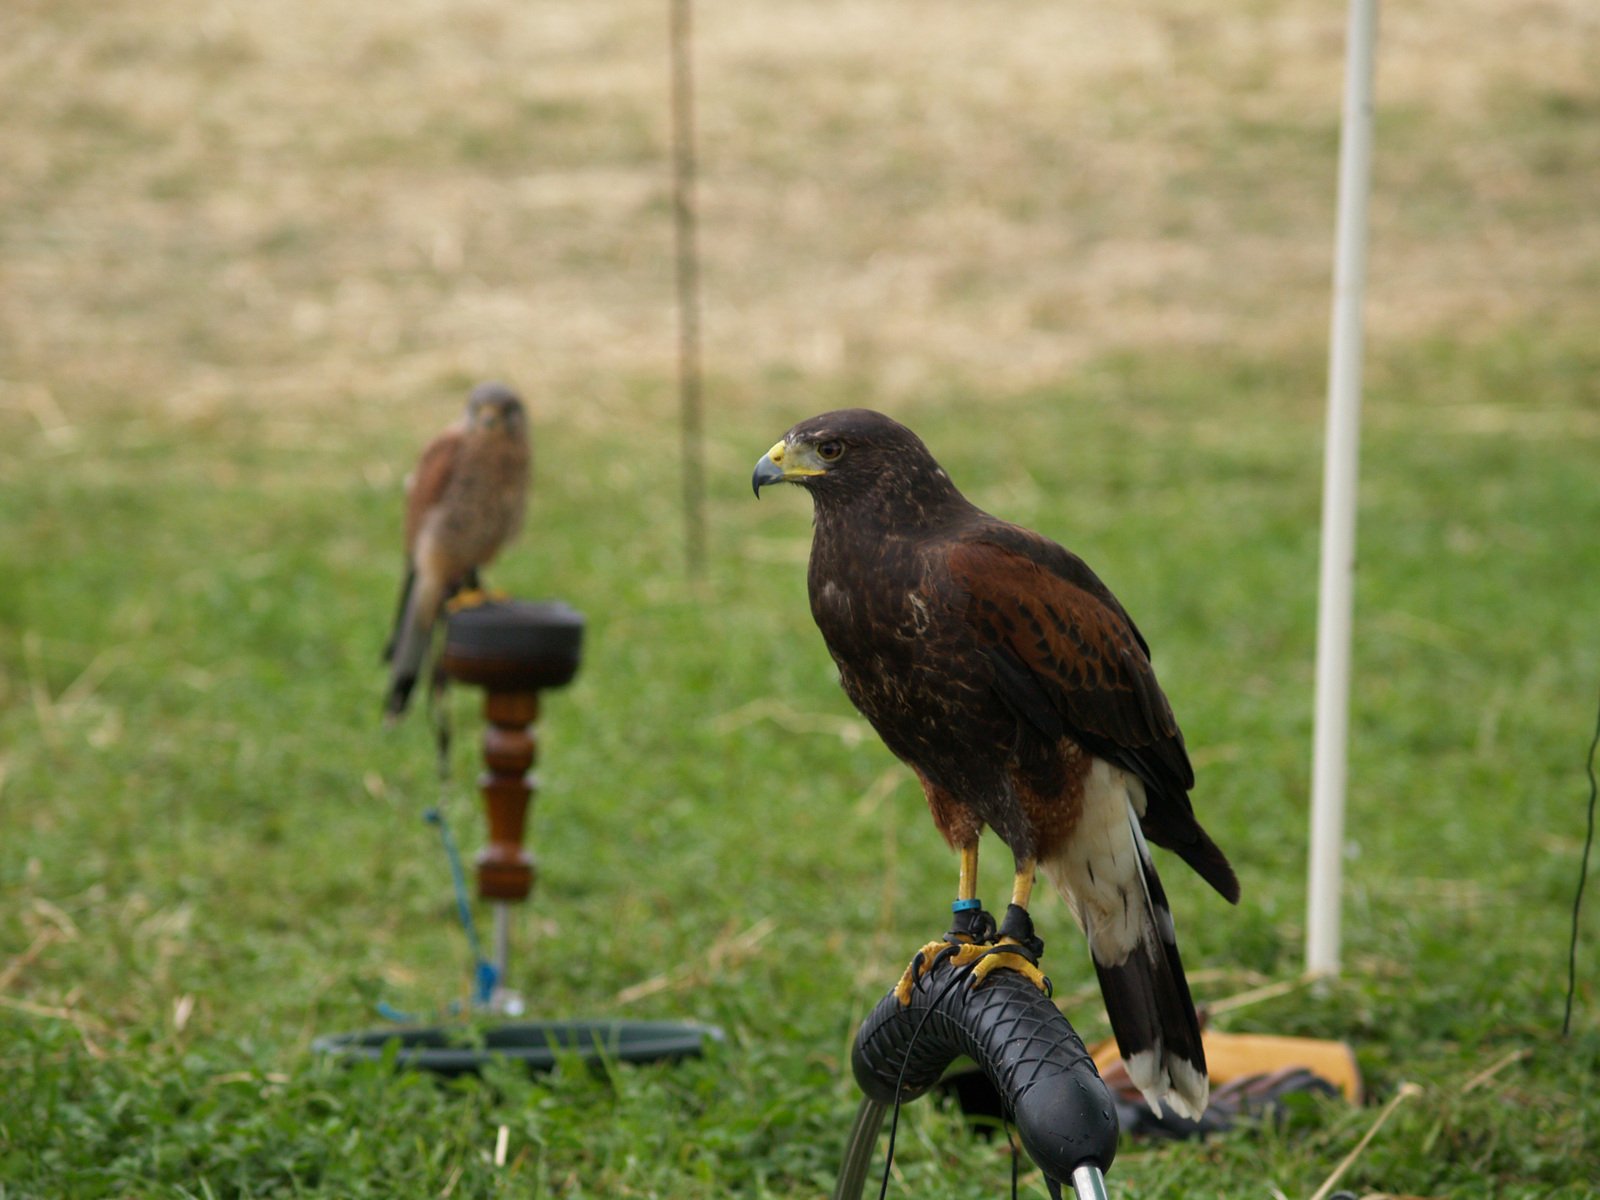 two large birds on display in grassy area